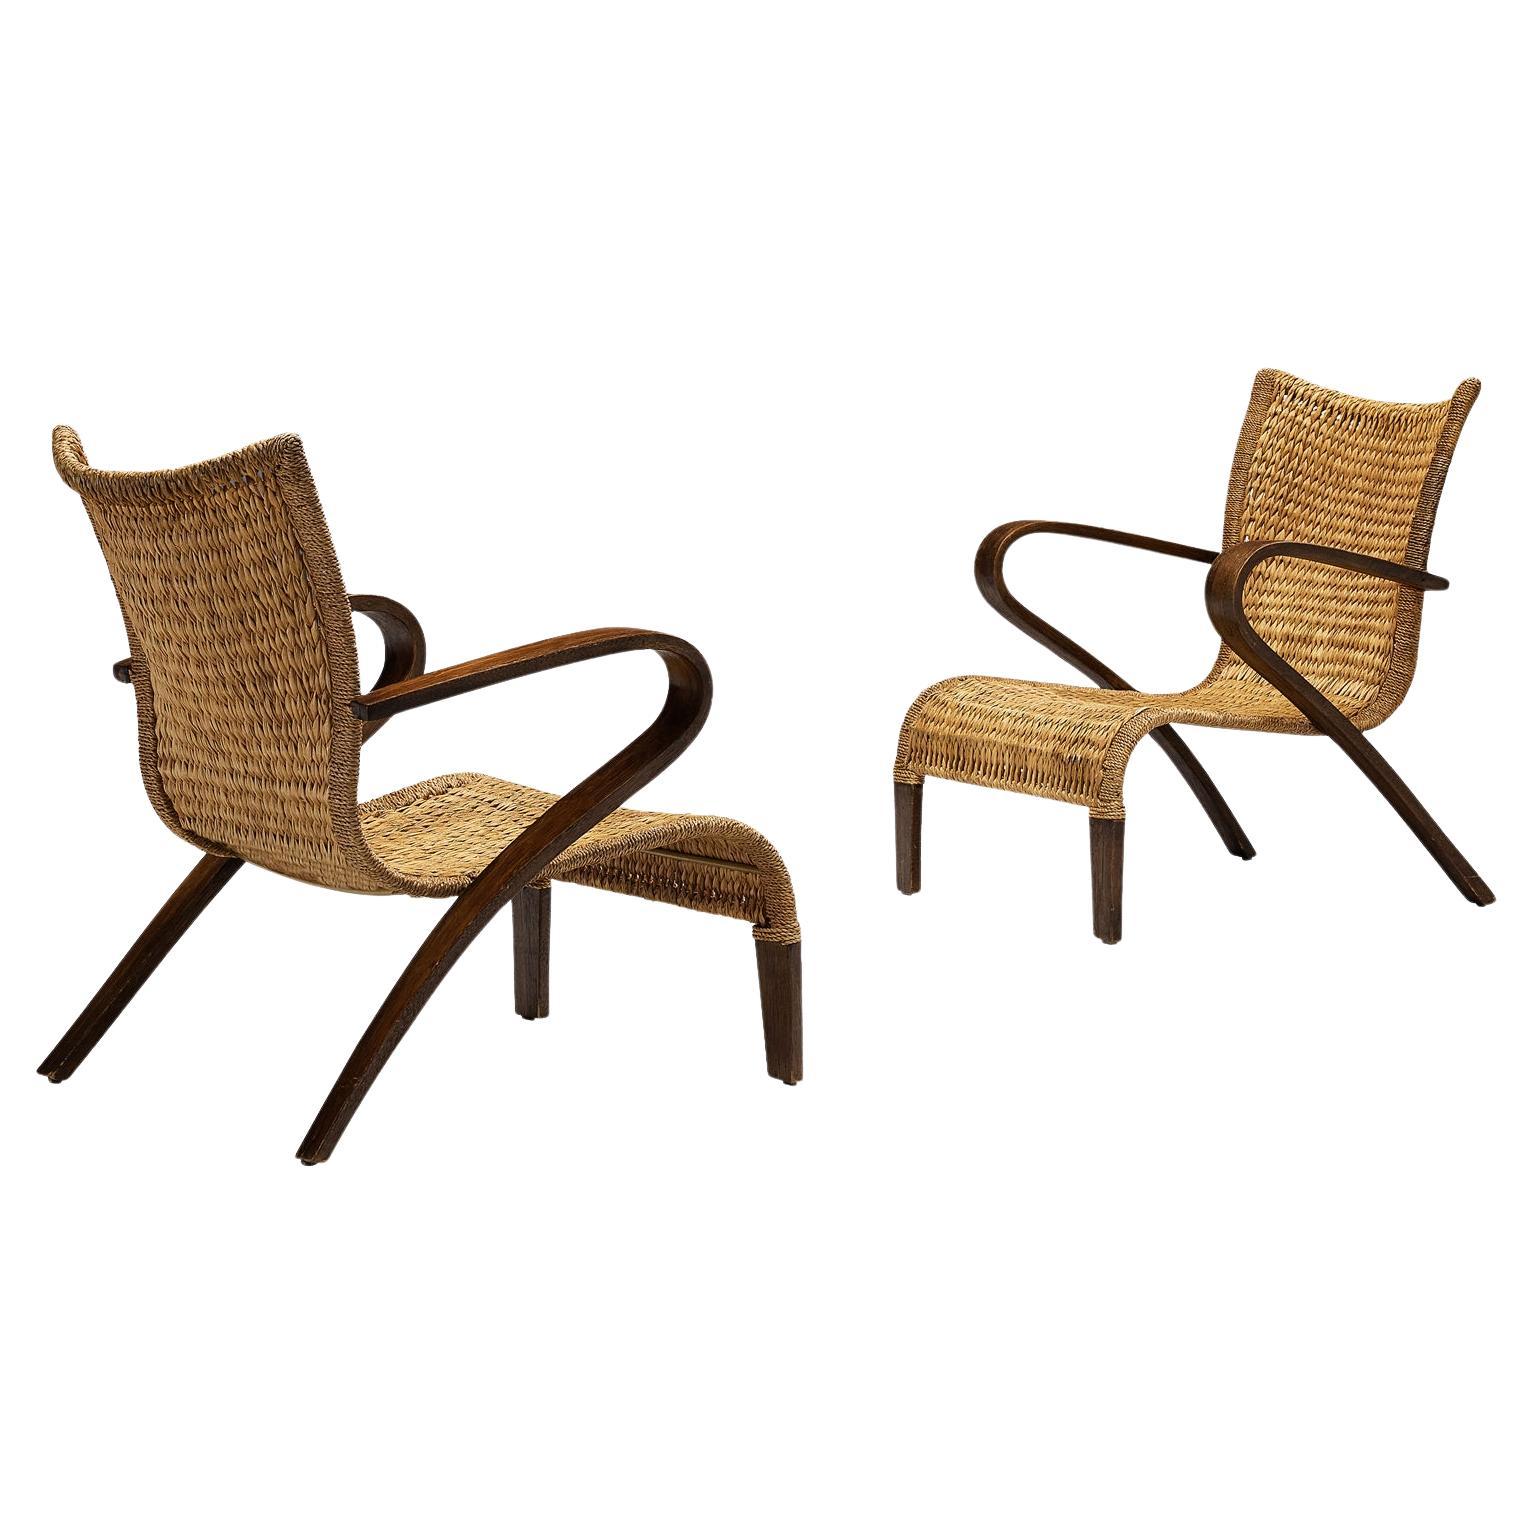 Charming Pair of Rustic French Lounge Chairs 